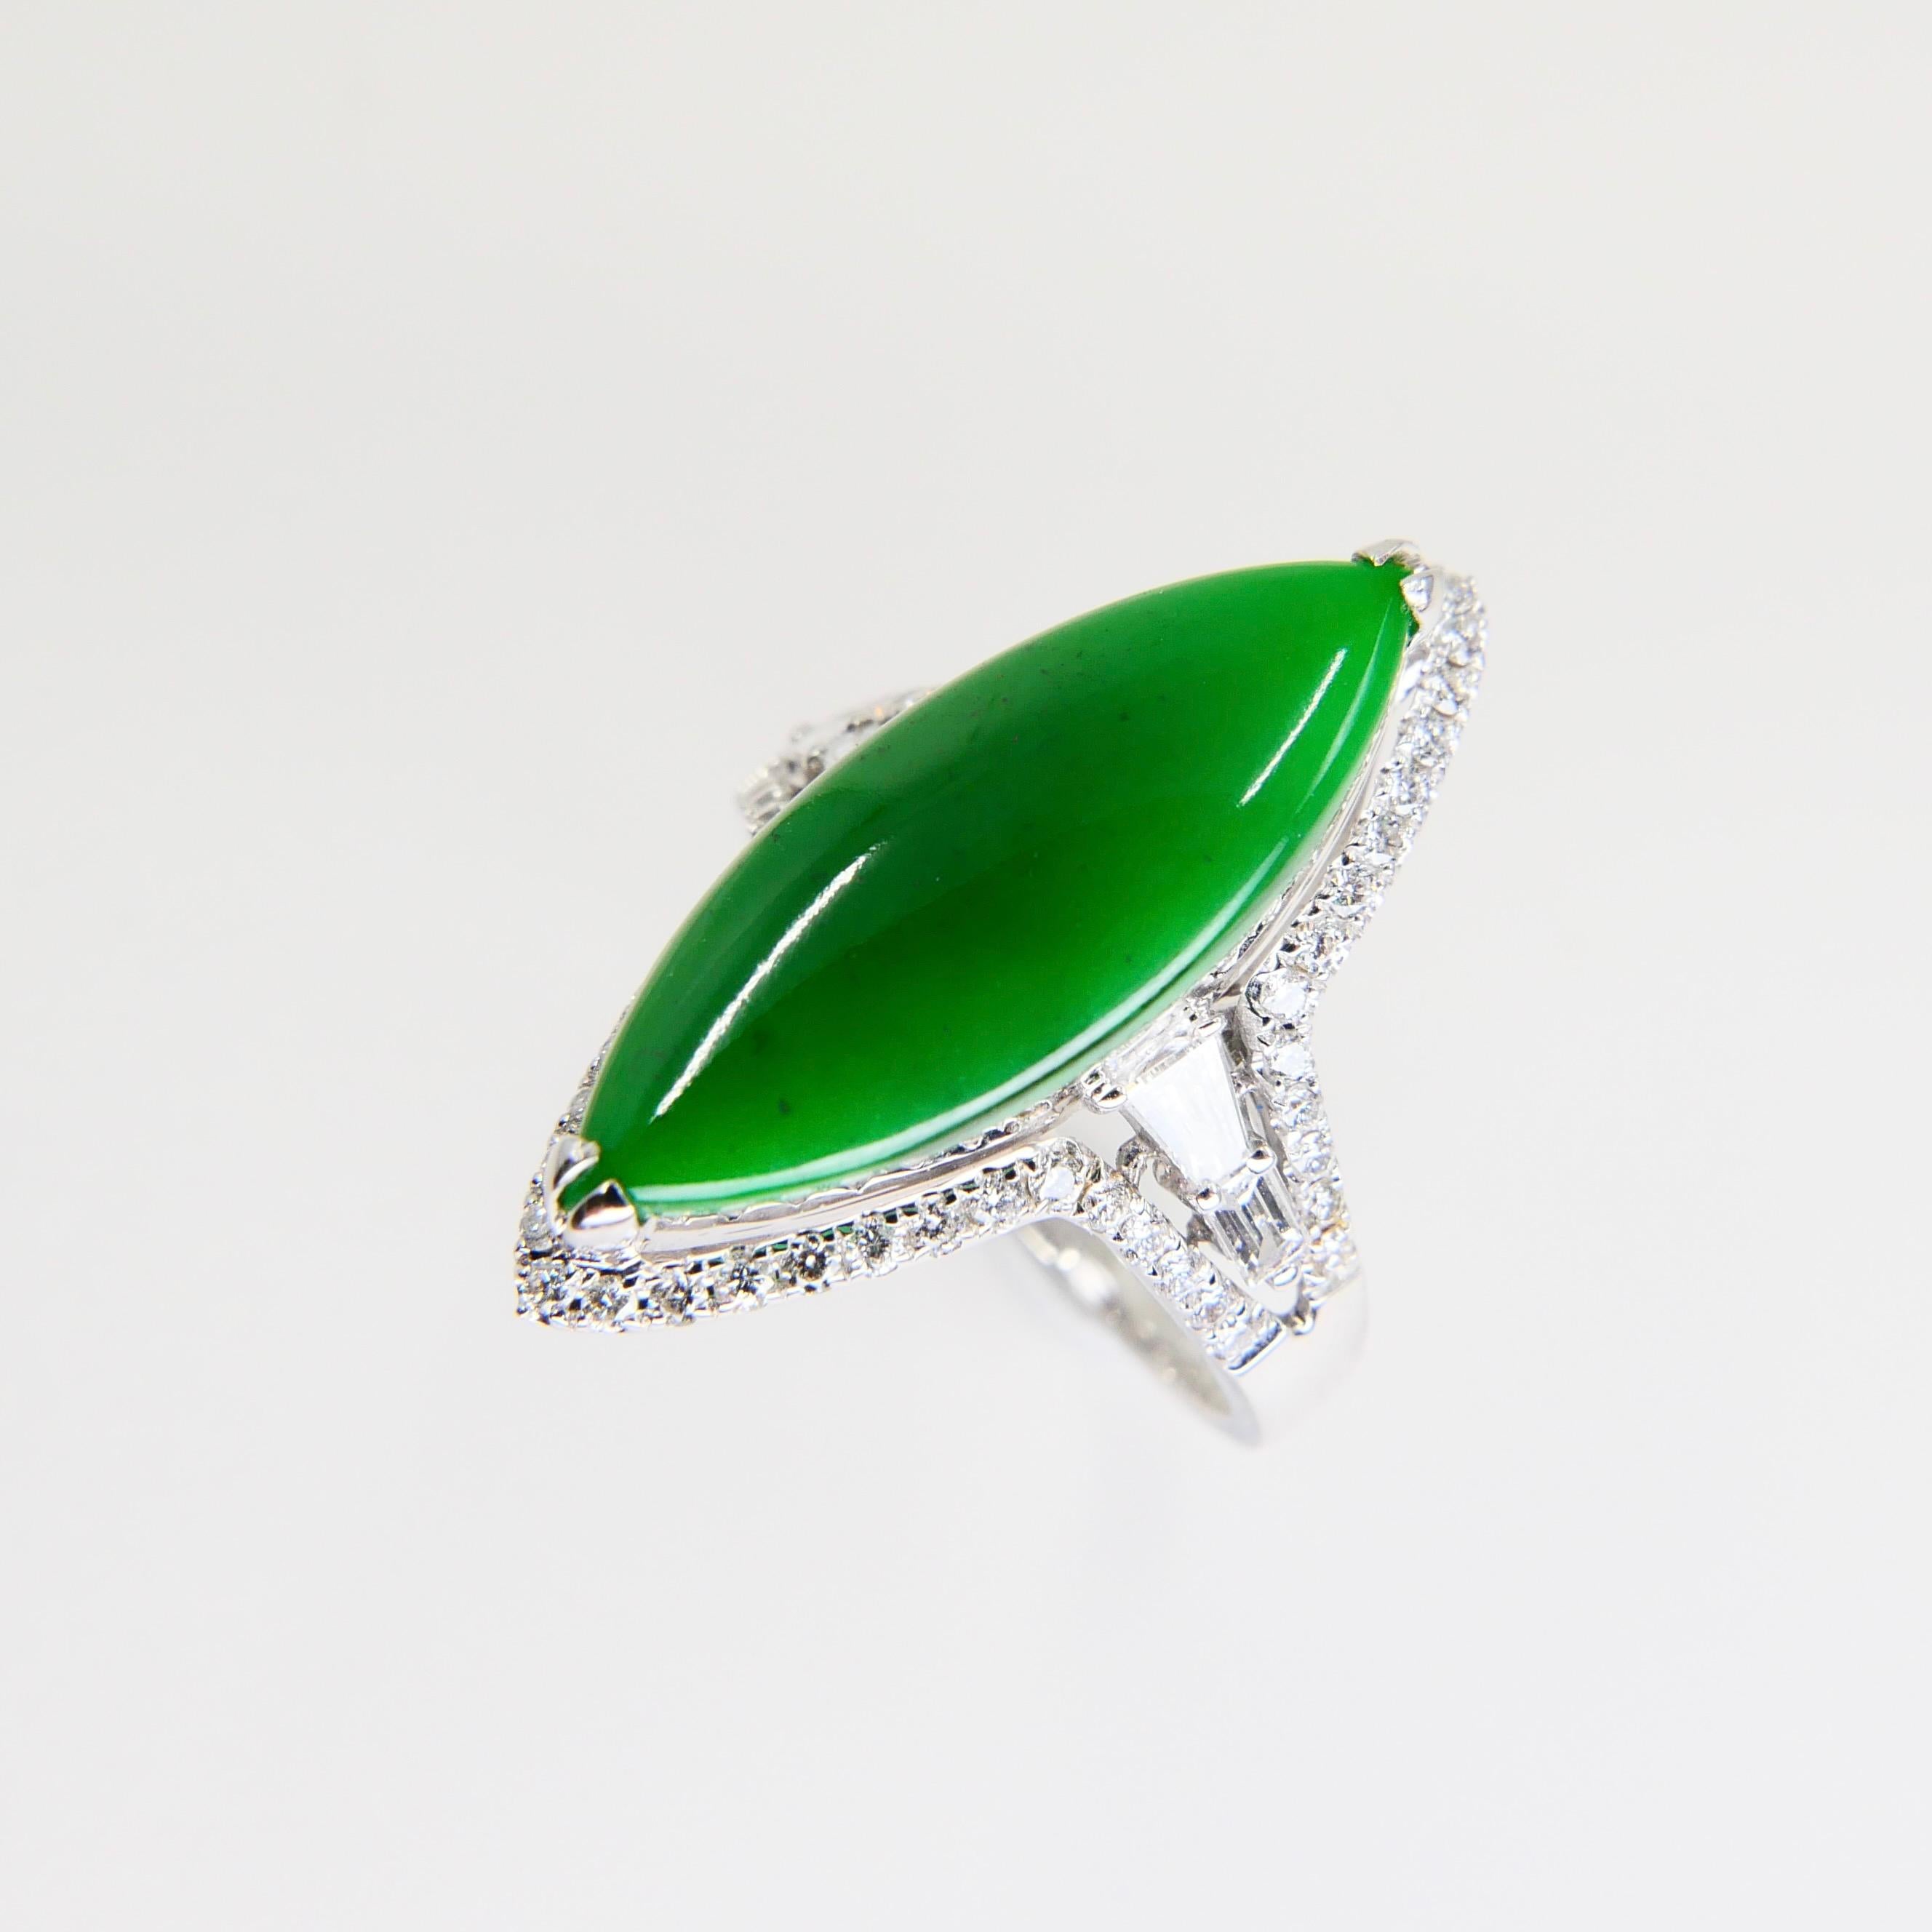 Certified Jadeite Jade and Diamond Cocktail Ring, Intense Apple Green Color For Sale 6